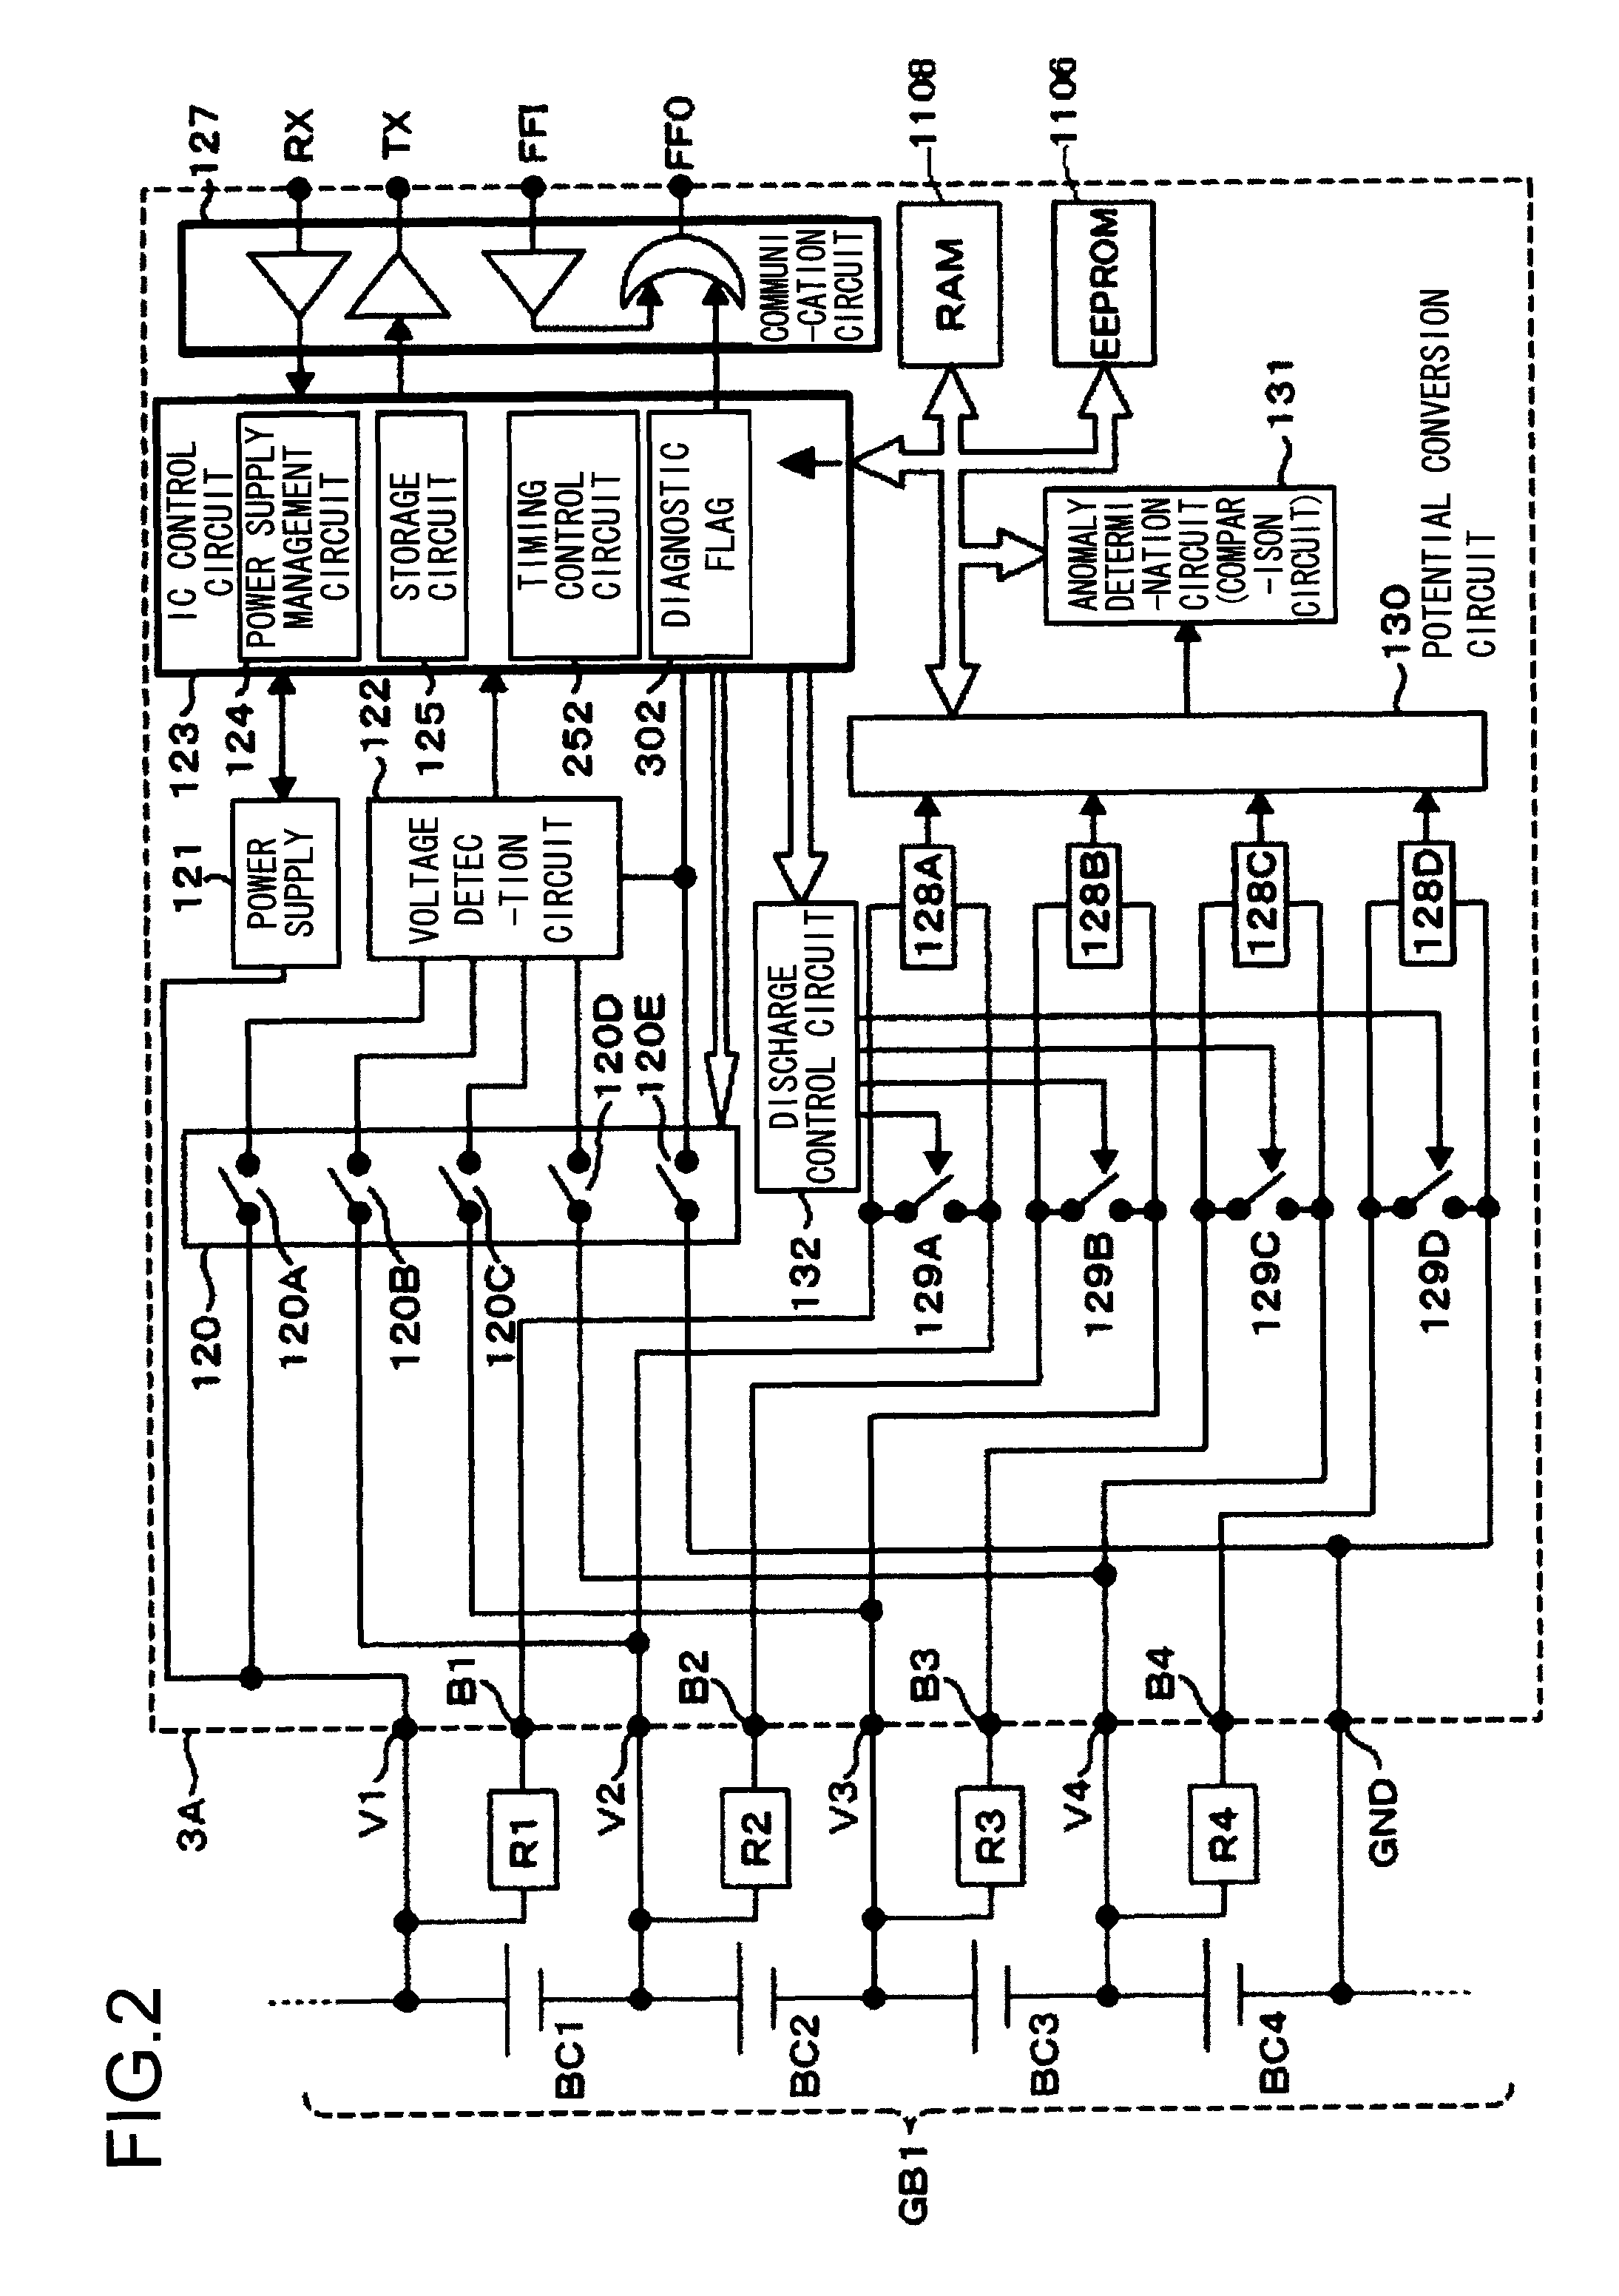 Battery management system using non-volatile memory